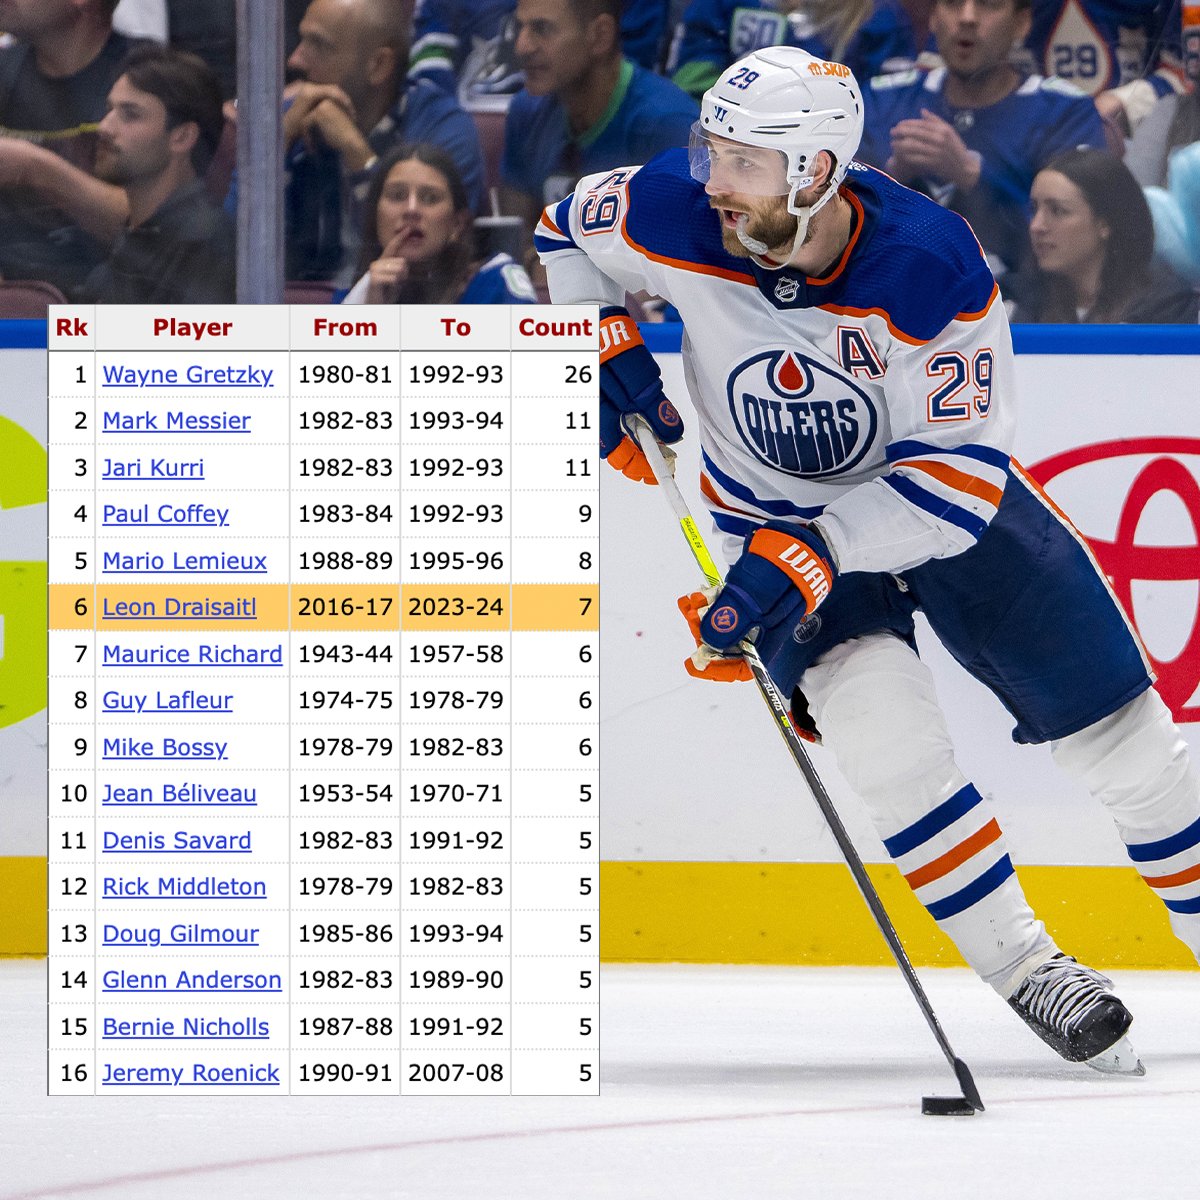 Game 2 against Vancouver was Leon Draisaitl's 7th career playoff game with 4+ points—that's the 6th most in NHL history. #NHL | #Oilers